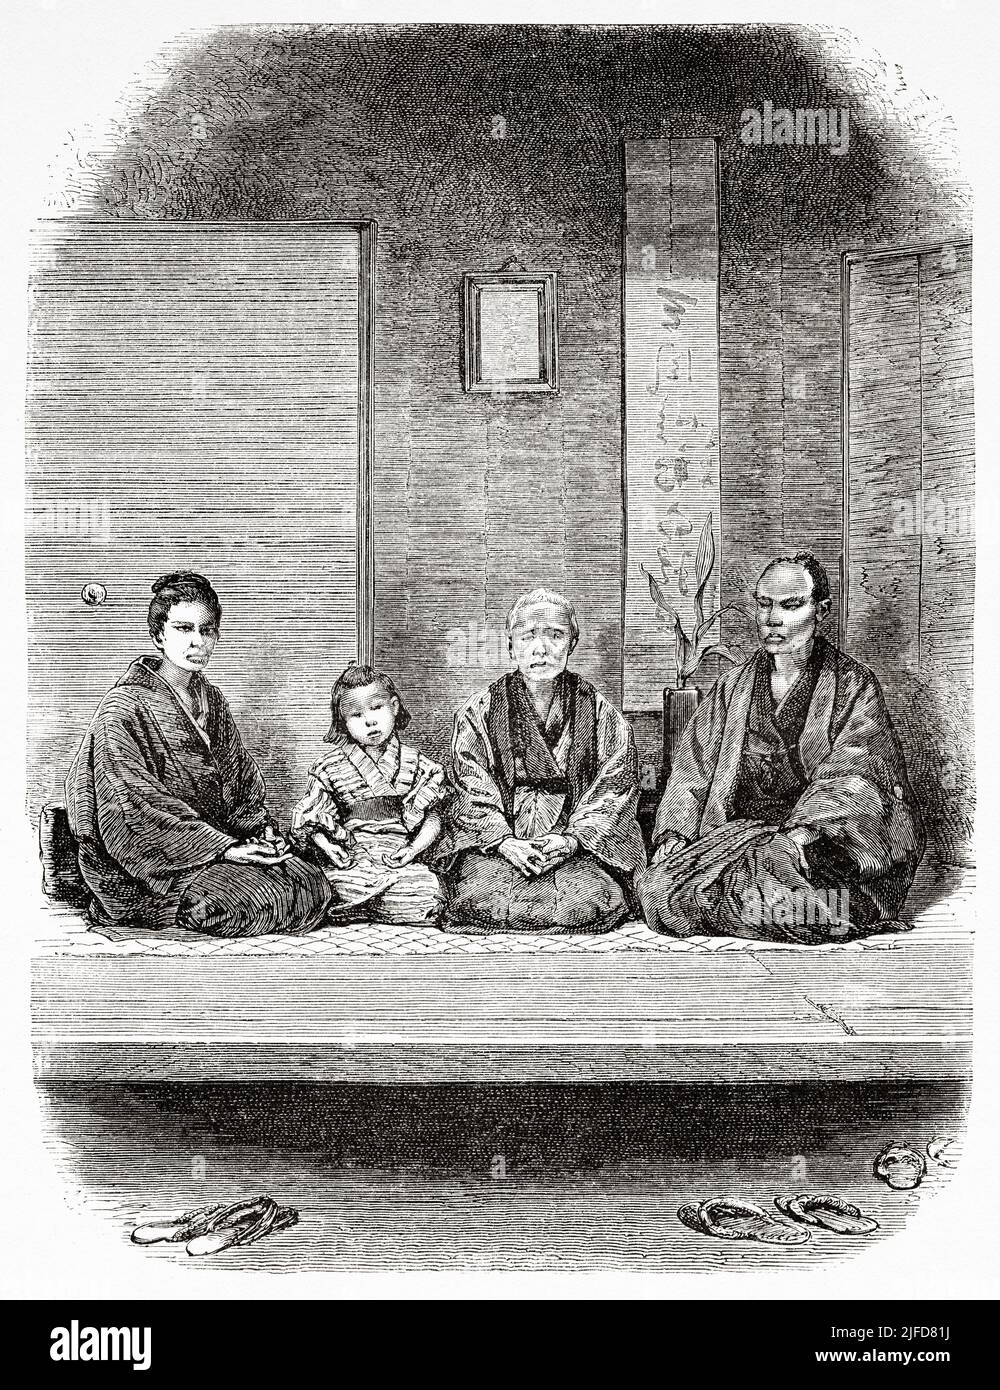 Merchants family, Tokyo. Japan, Asia. Journey to Japan by Aime Humbert 1863-1864 from Le Tour du Monde 1867 Stock Photo